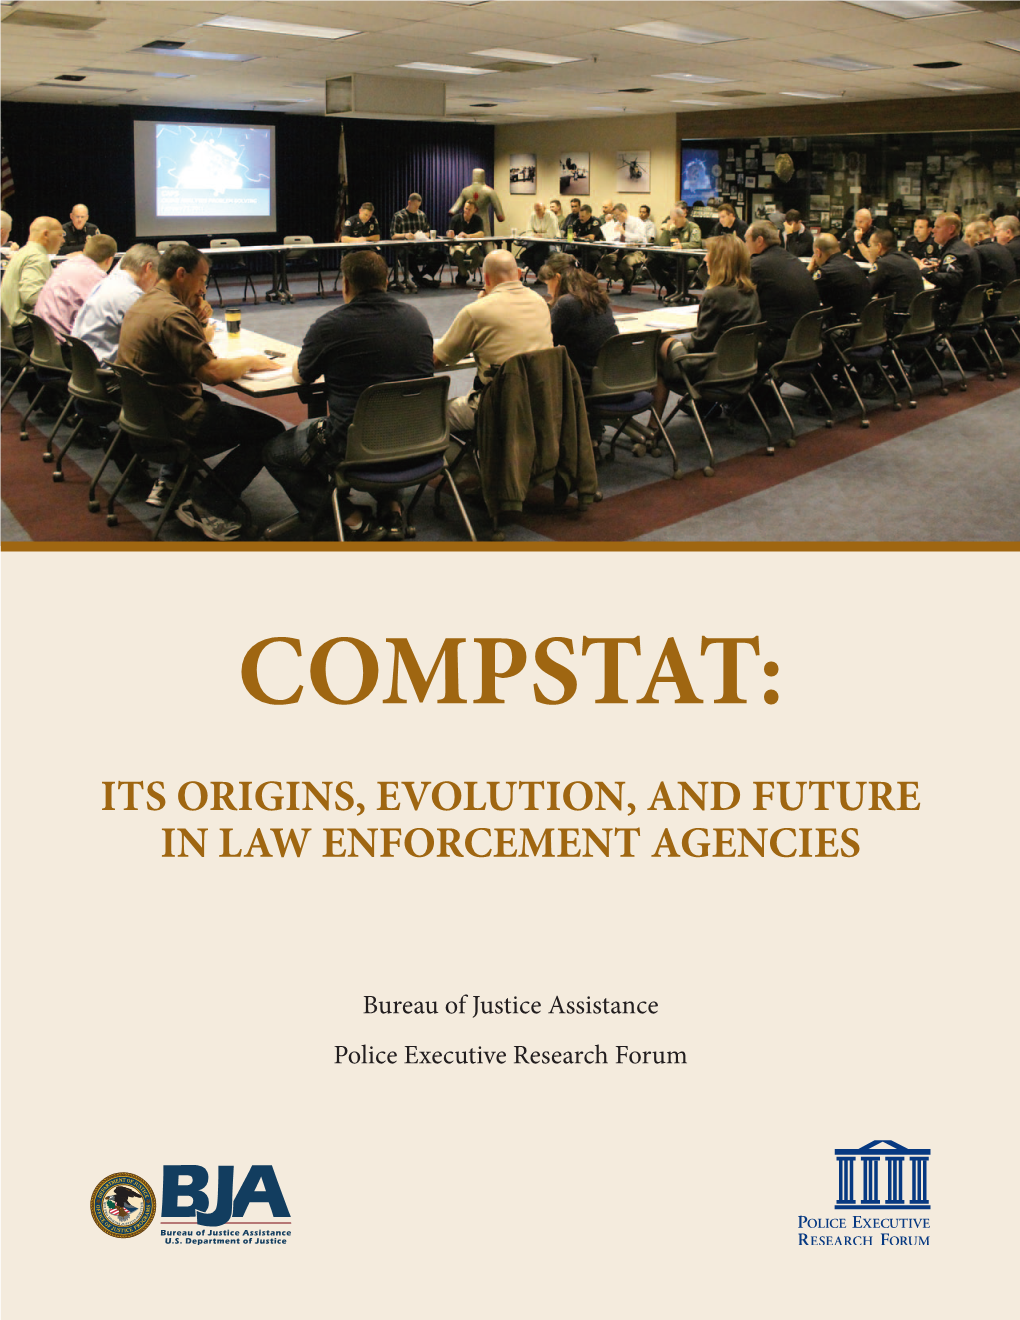 COMPSTAT: Its Origins, Evolution and Future in Law Enforcement